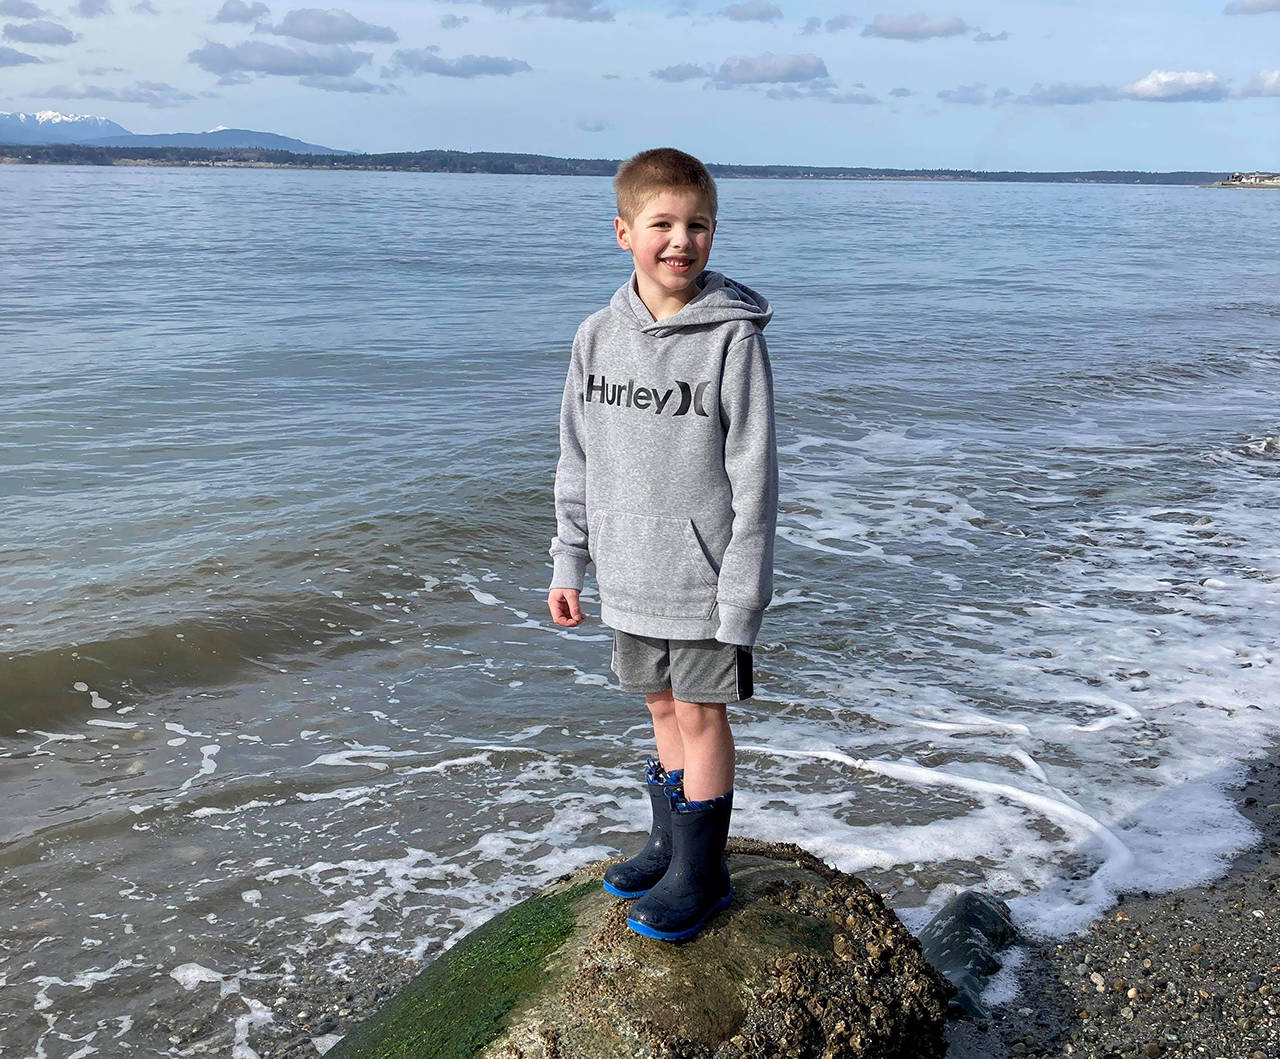 Blake Lewis, 7, at Bush Point where he threw a message in a bottle out to sea. Ruth Smethers later picked it up in Port Townsend. (Jessie Lewis)